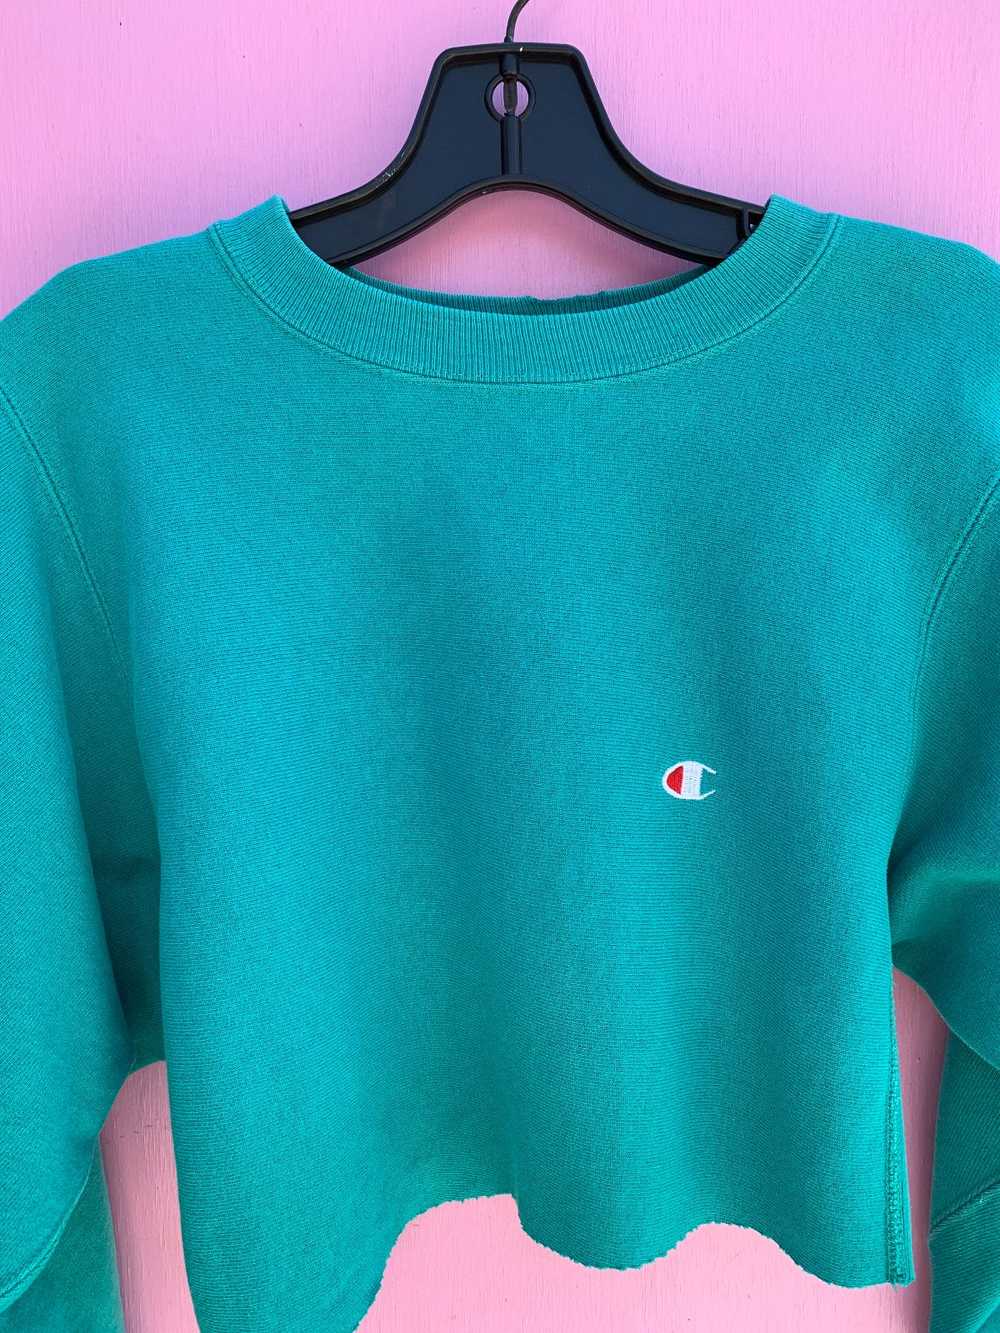 CROPPED CREWNECK REVERSE WEAVE CHAMPION EMBROIDER… - image 2